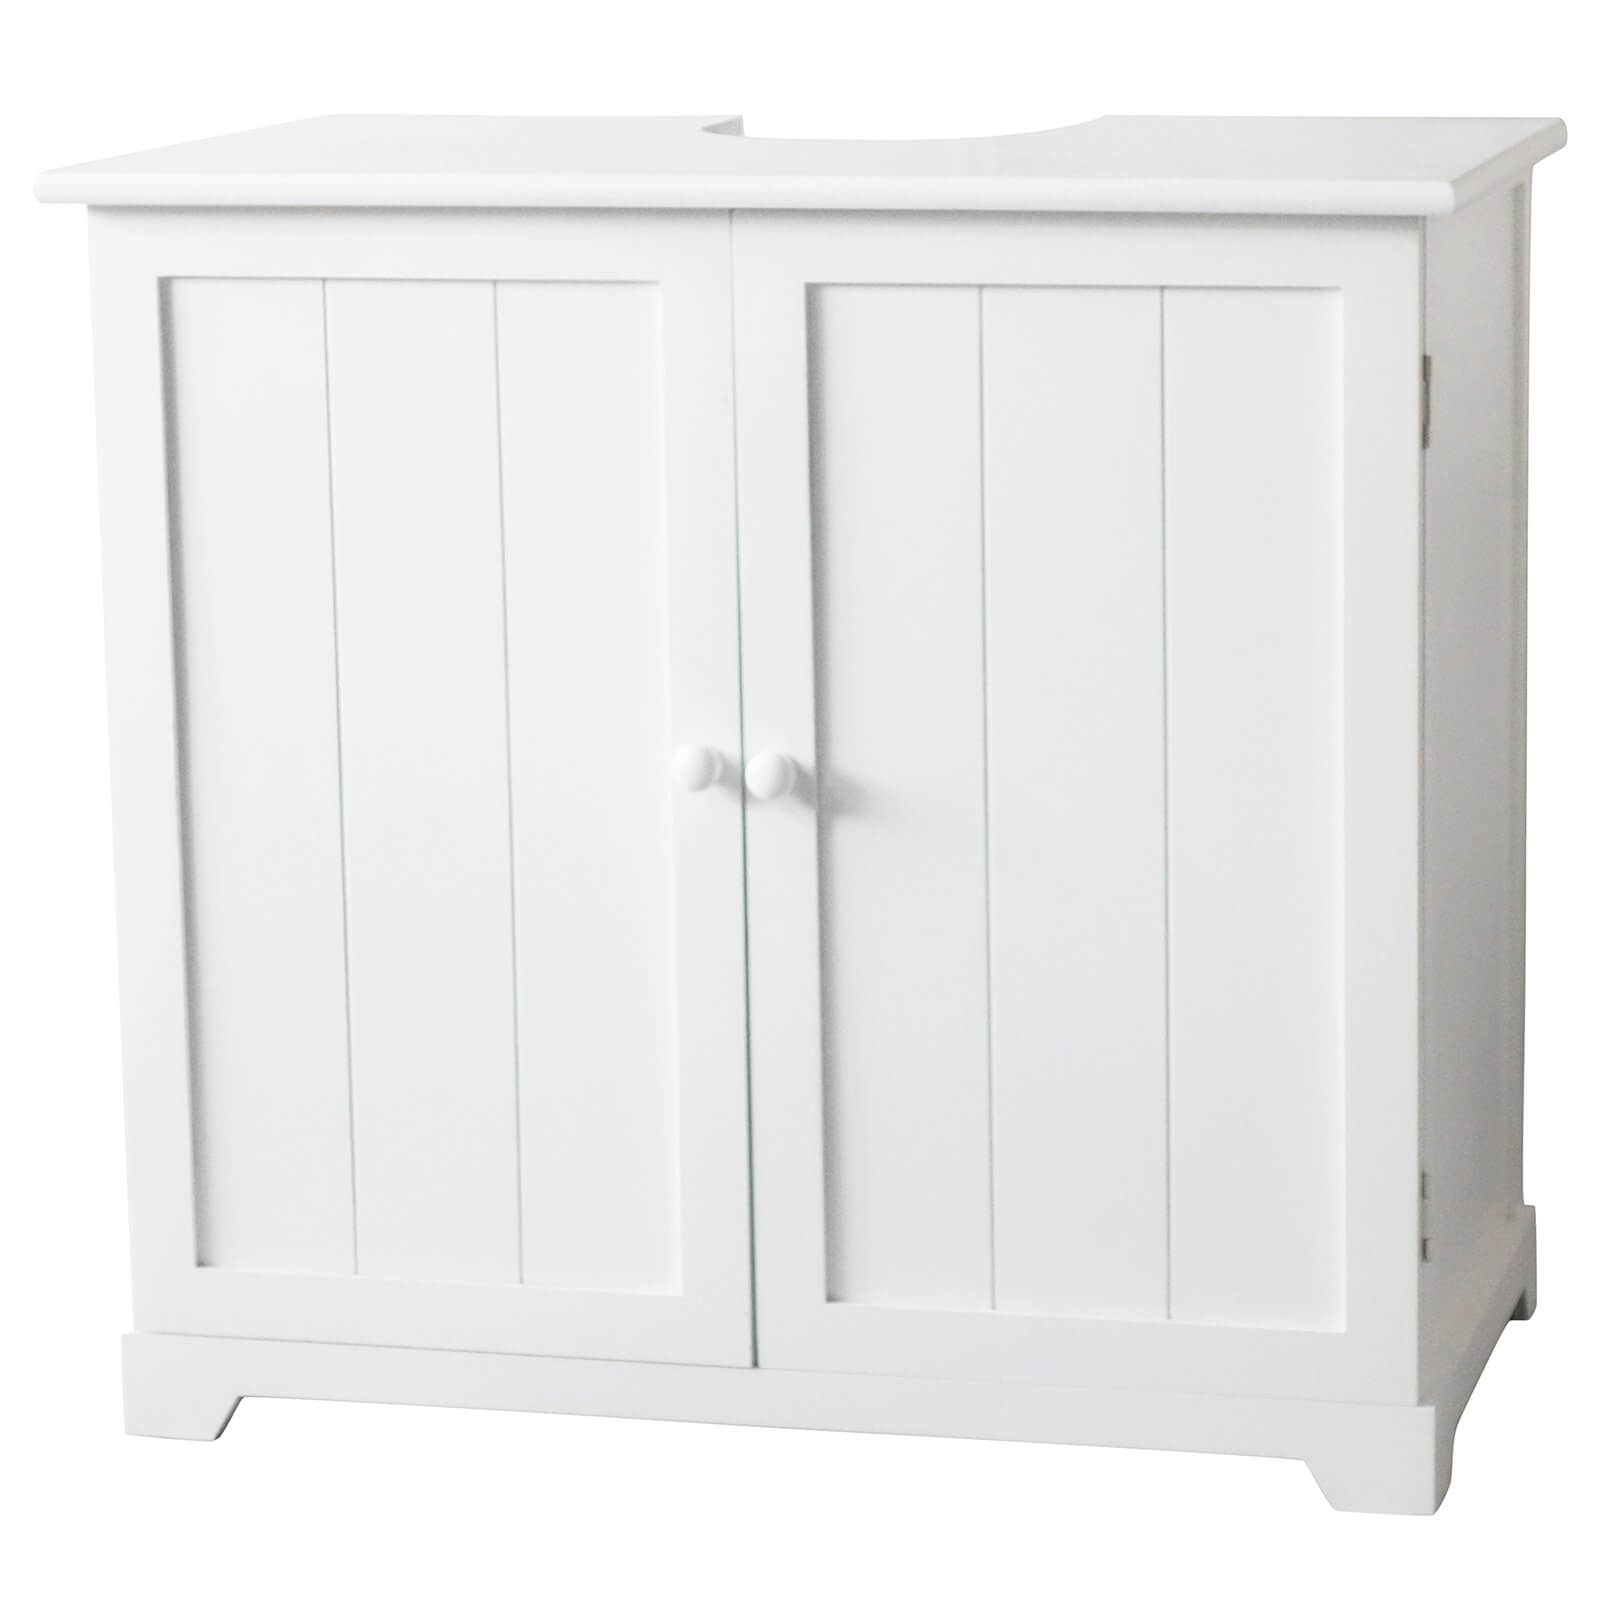 Classic Under Sink Cabinet with 2 Doors/1 Shelf - White